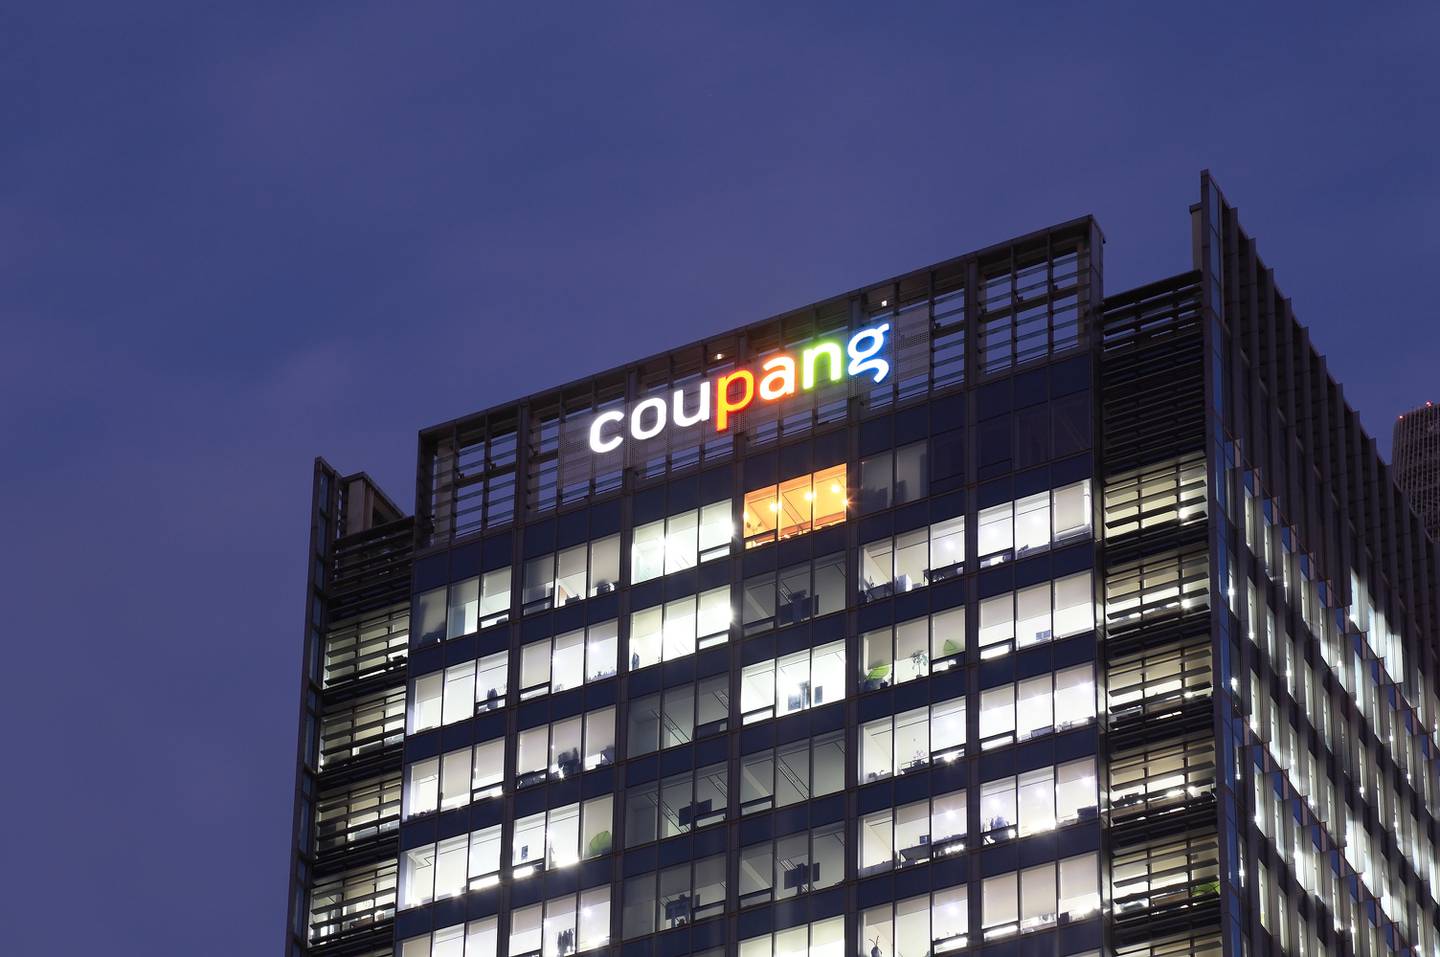 Coupang headquarters in Seoul